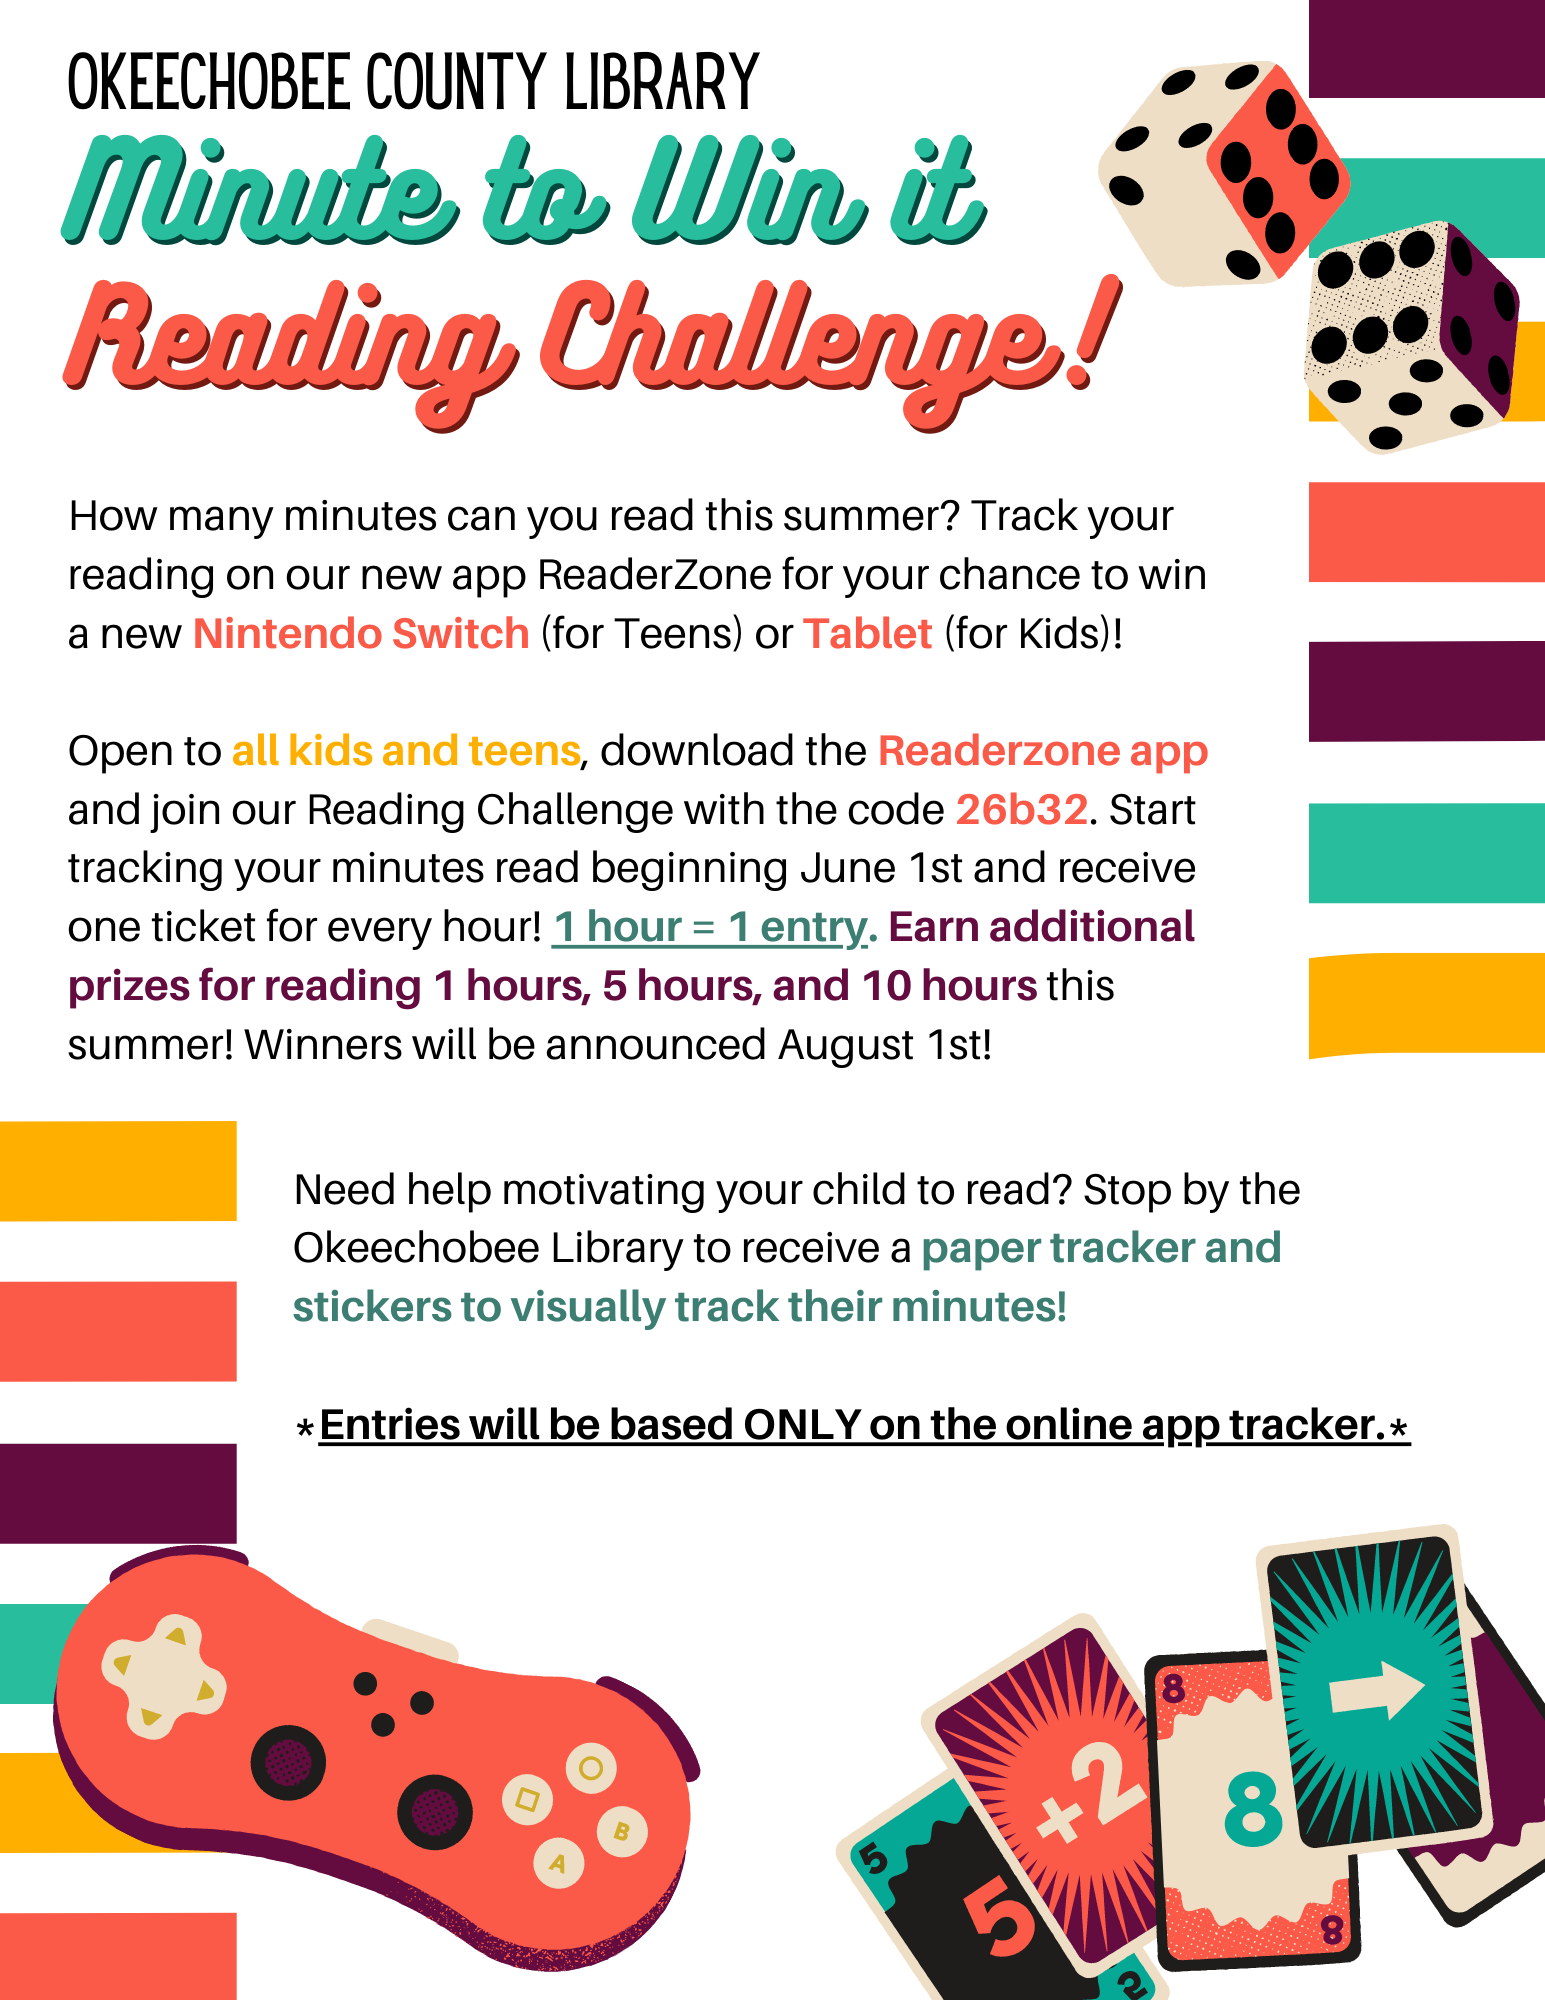 How many minutes can you read this summer? Track your reading on our new app ReaderZone with the code 26b32 for your chance to win a new Nintendo Switch (for Teens) or Tablet (for Kids)!